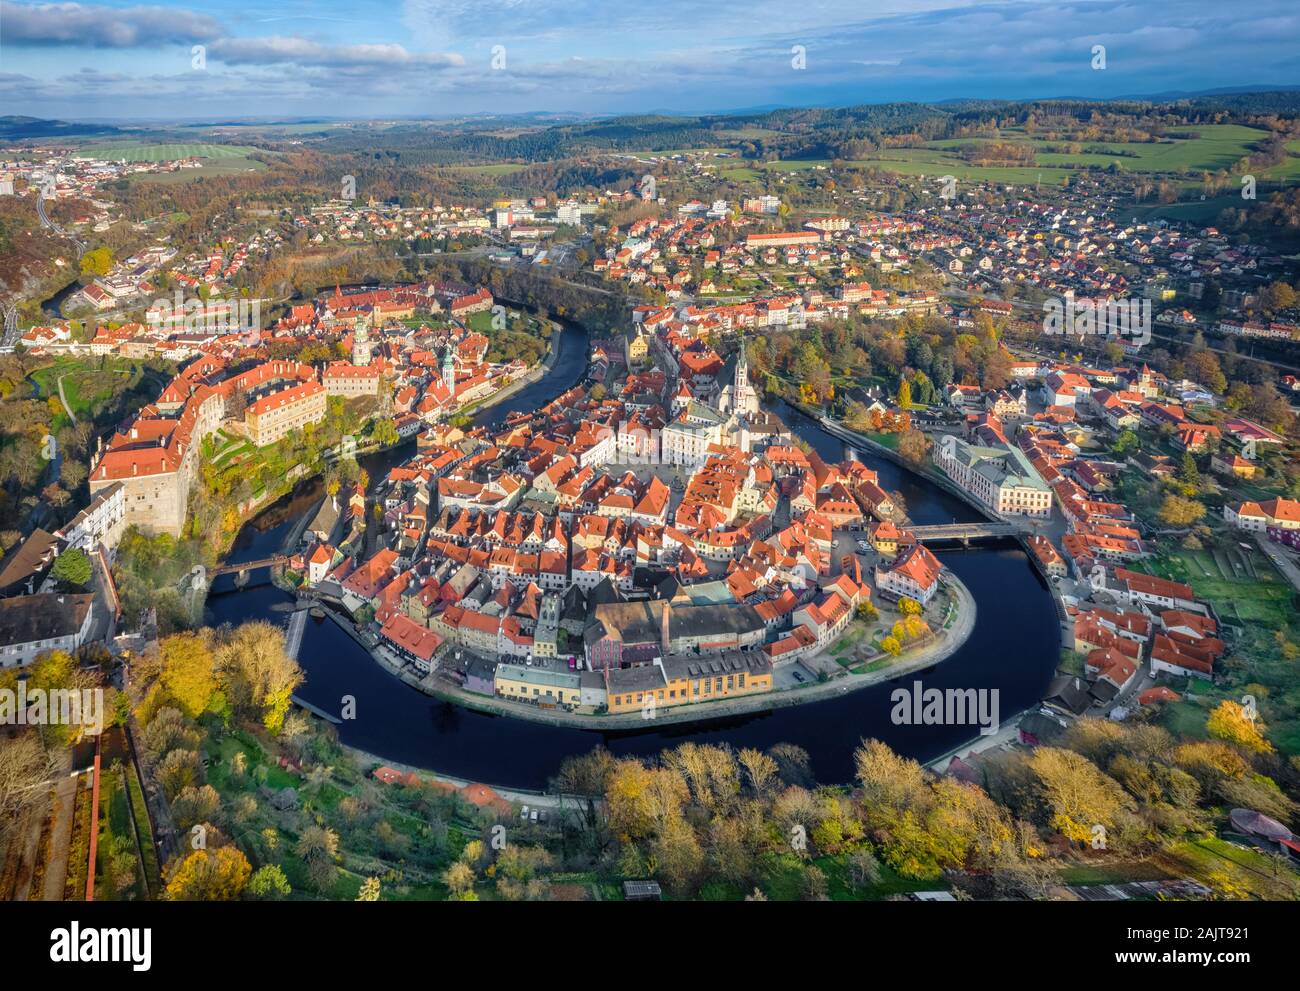 Aerial view of Cesky Krumlov - historic European city surrounded by bend of Vltava river, Czech Republic Stock Photo